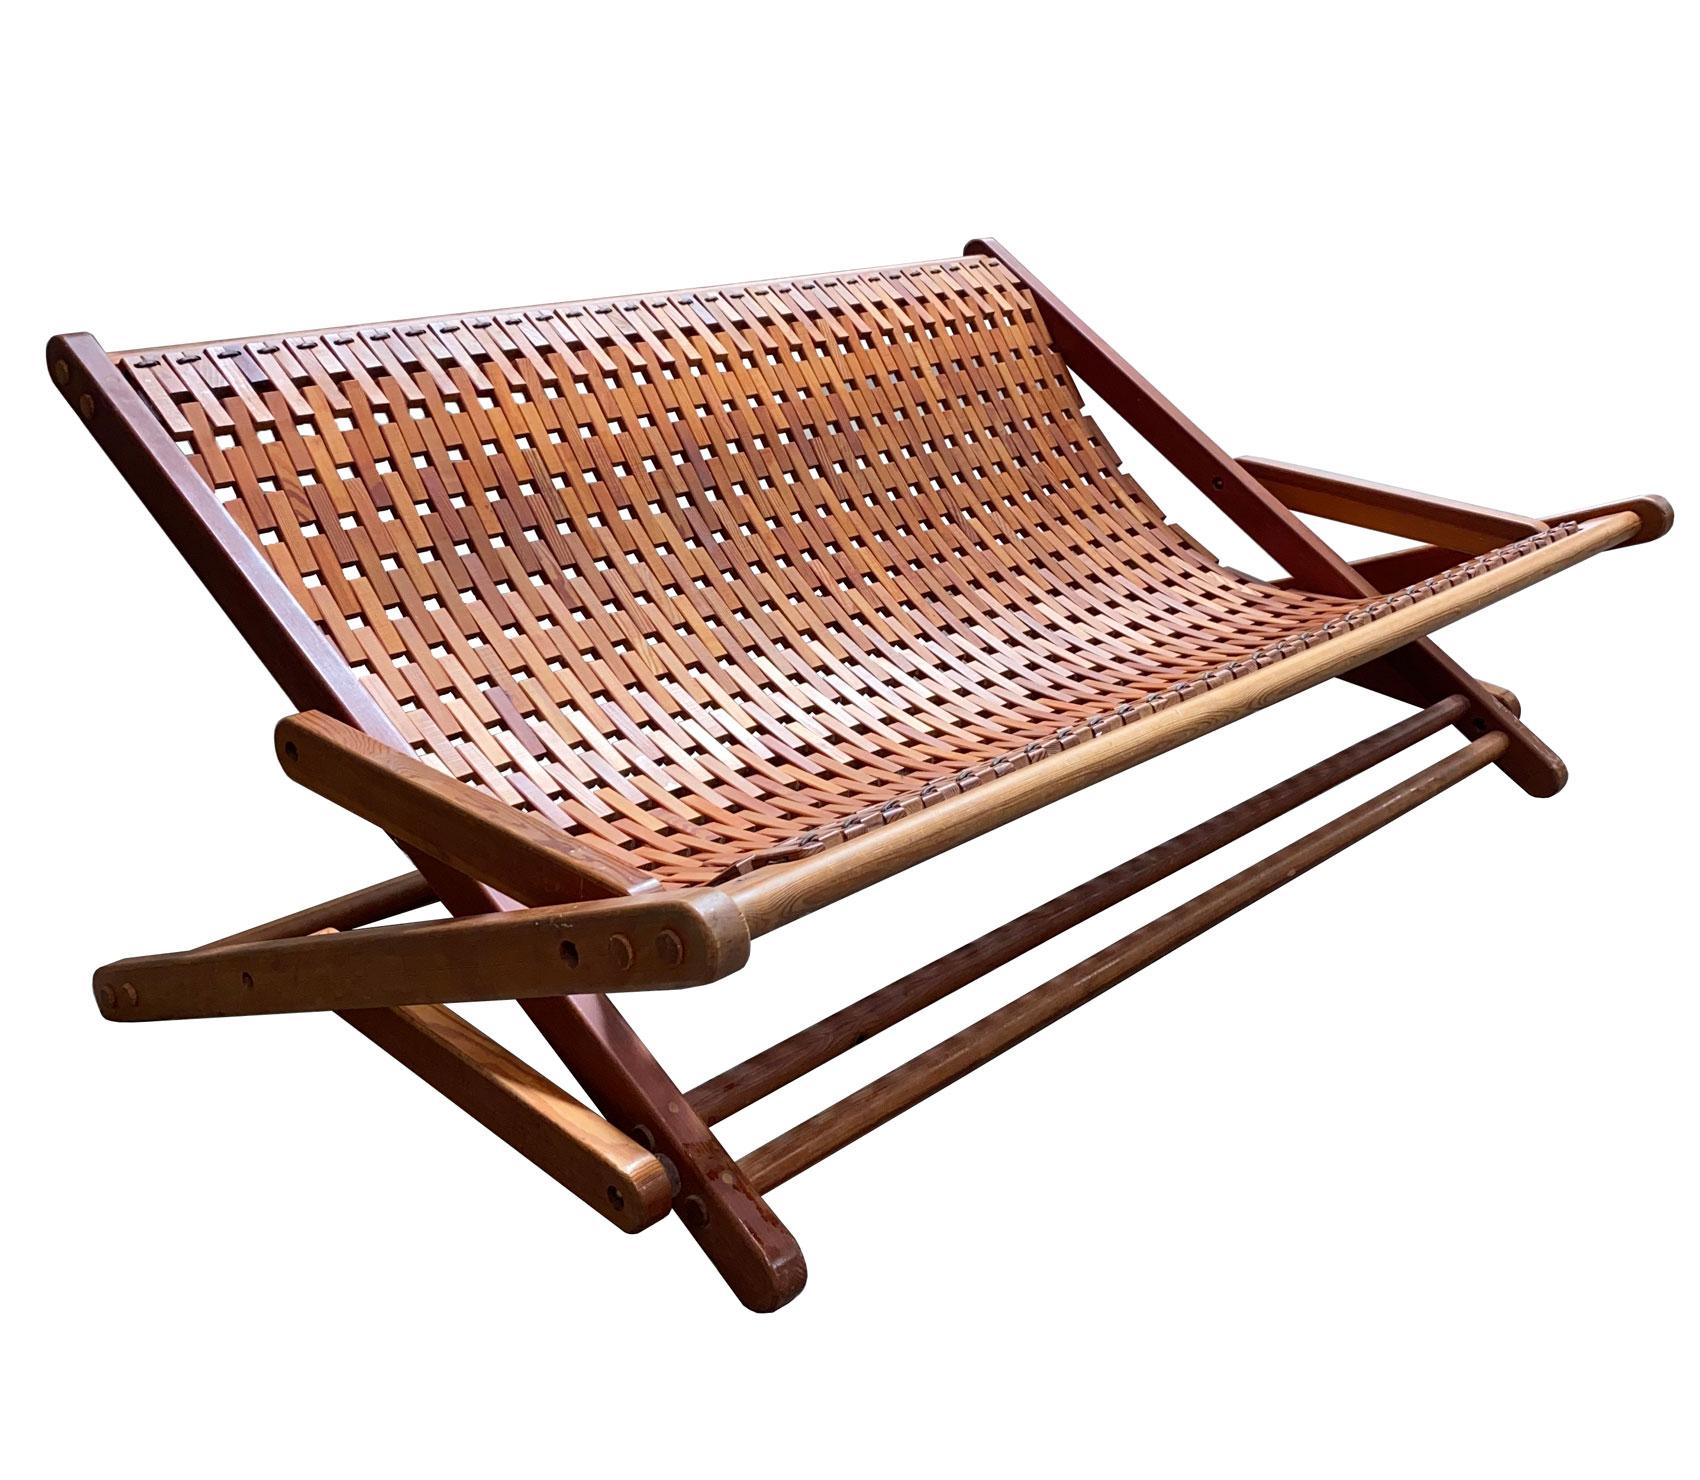 Folding and articulated bench in teak wood and rope, production of the 1960s from Brazil in the style of Zanine Caldas' creations.
        